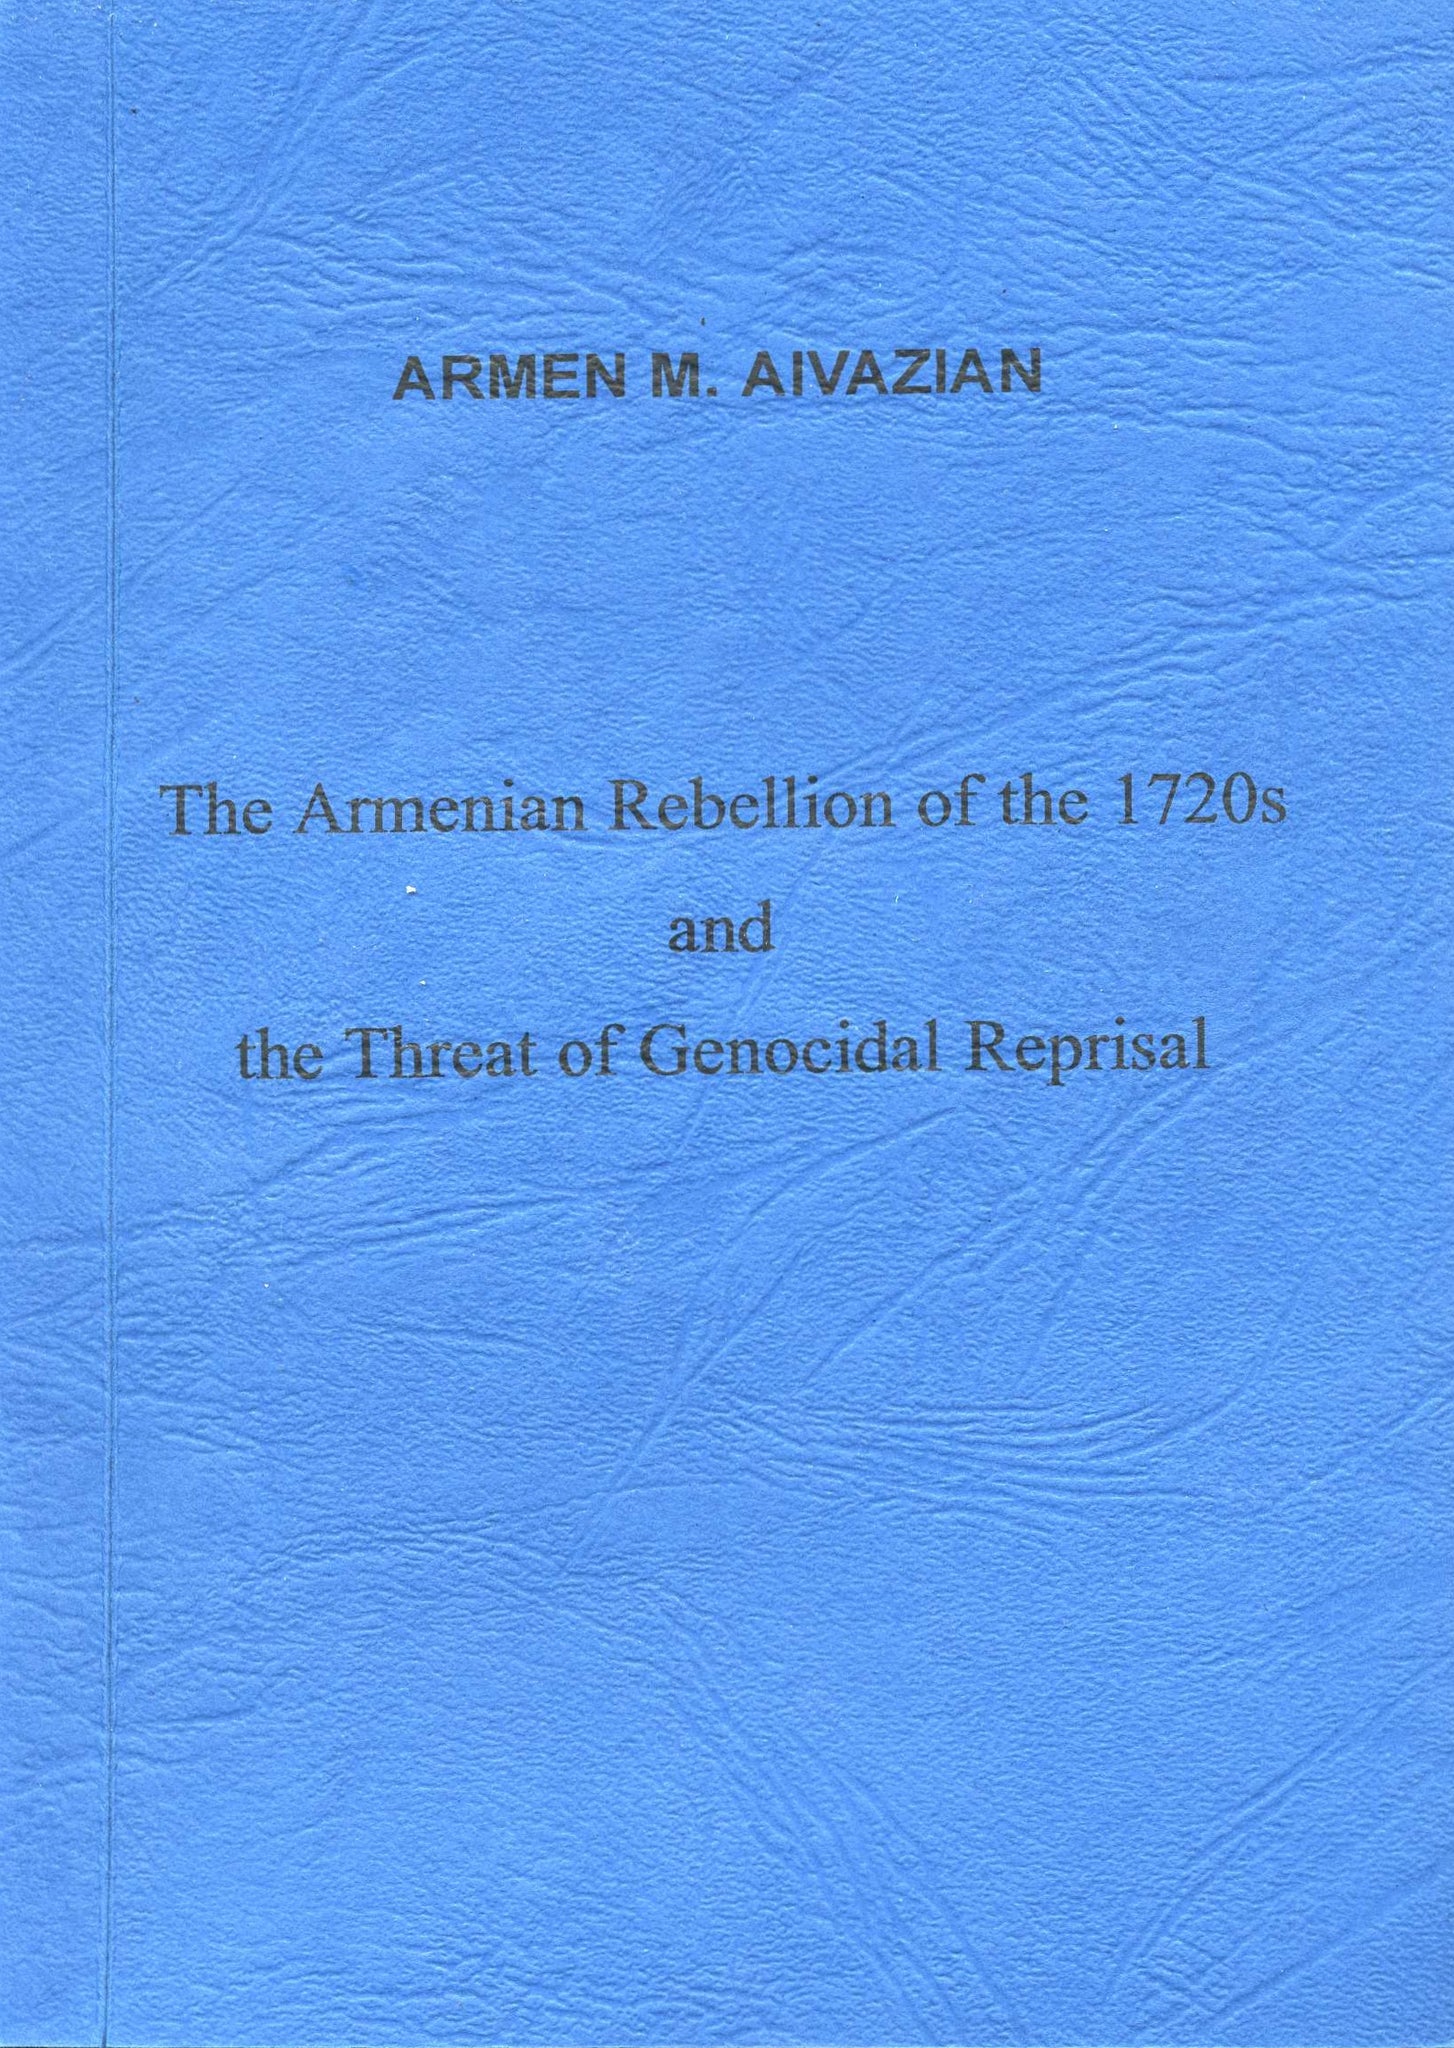 ARMENIAN REBELLION OF THE 1720s AND THE THREAT OF GENOCIDAL REPRISAL